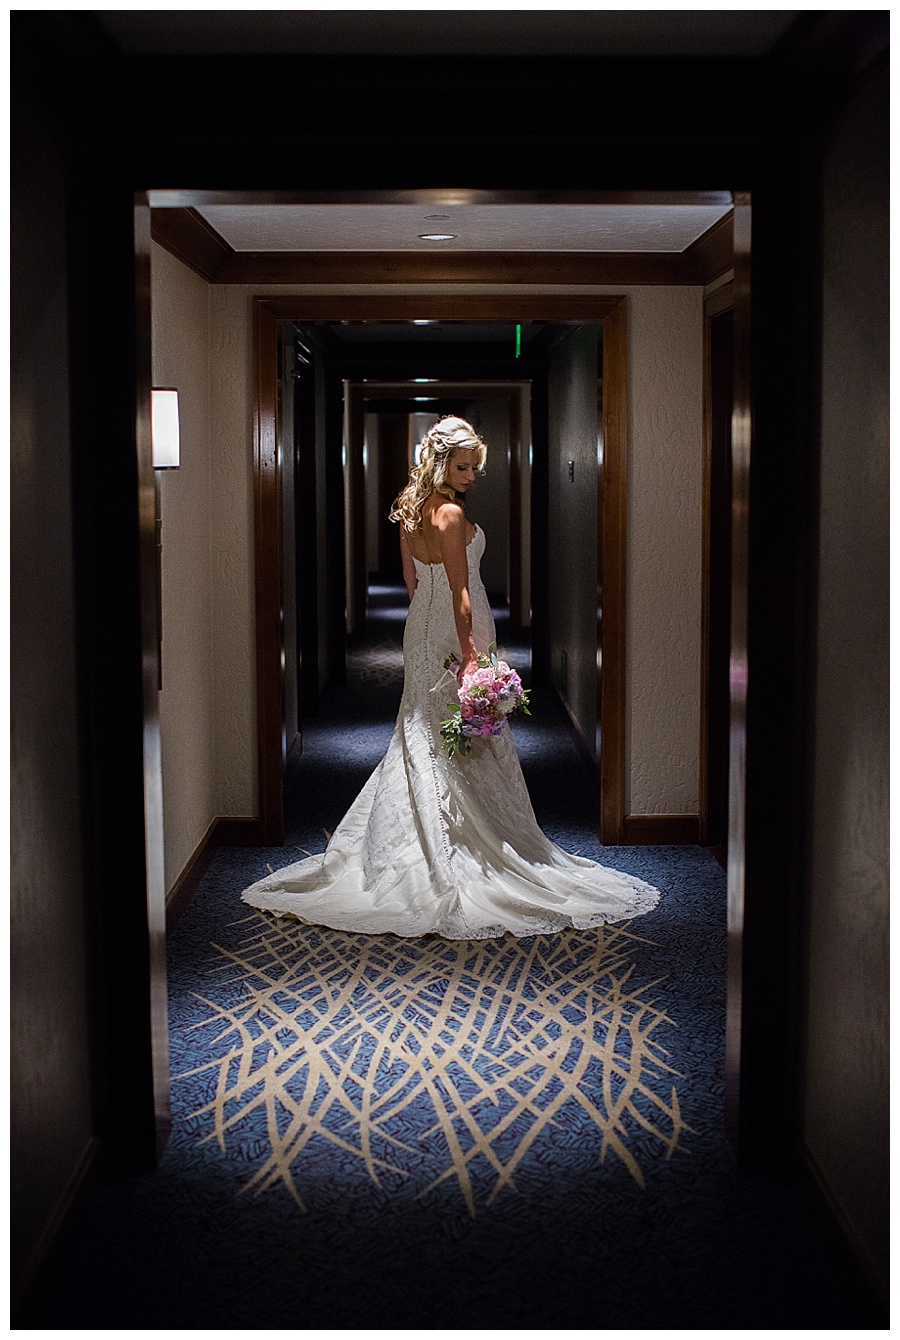 A photo every bride should have at The Ritz